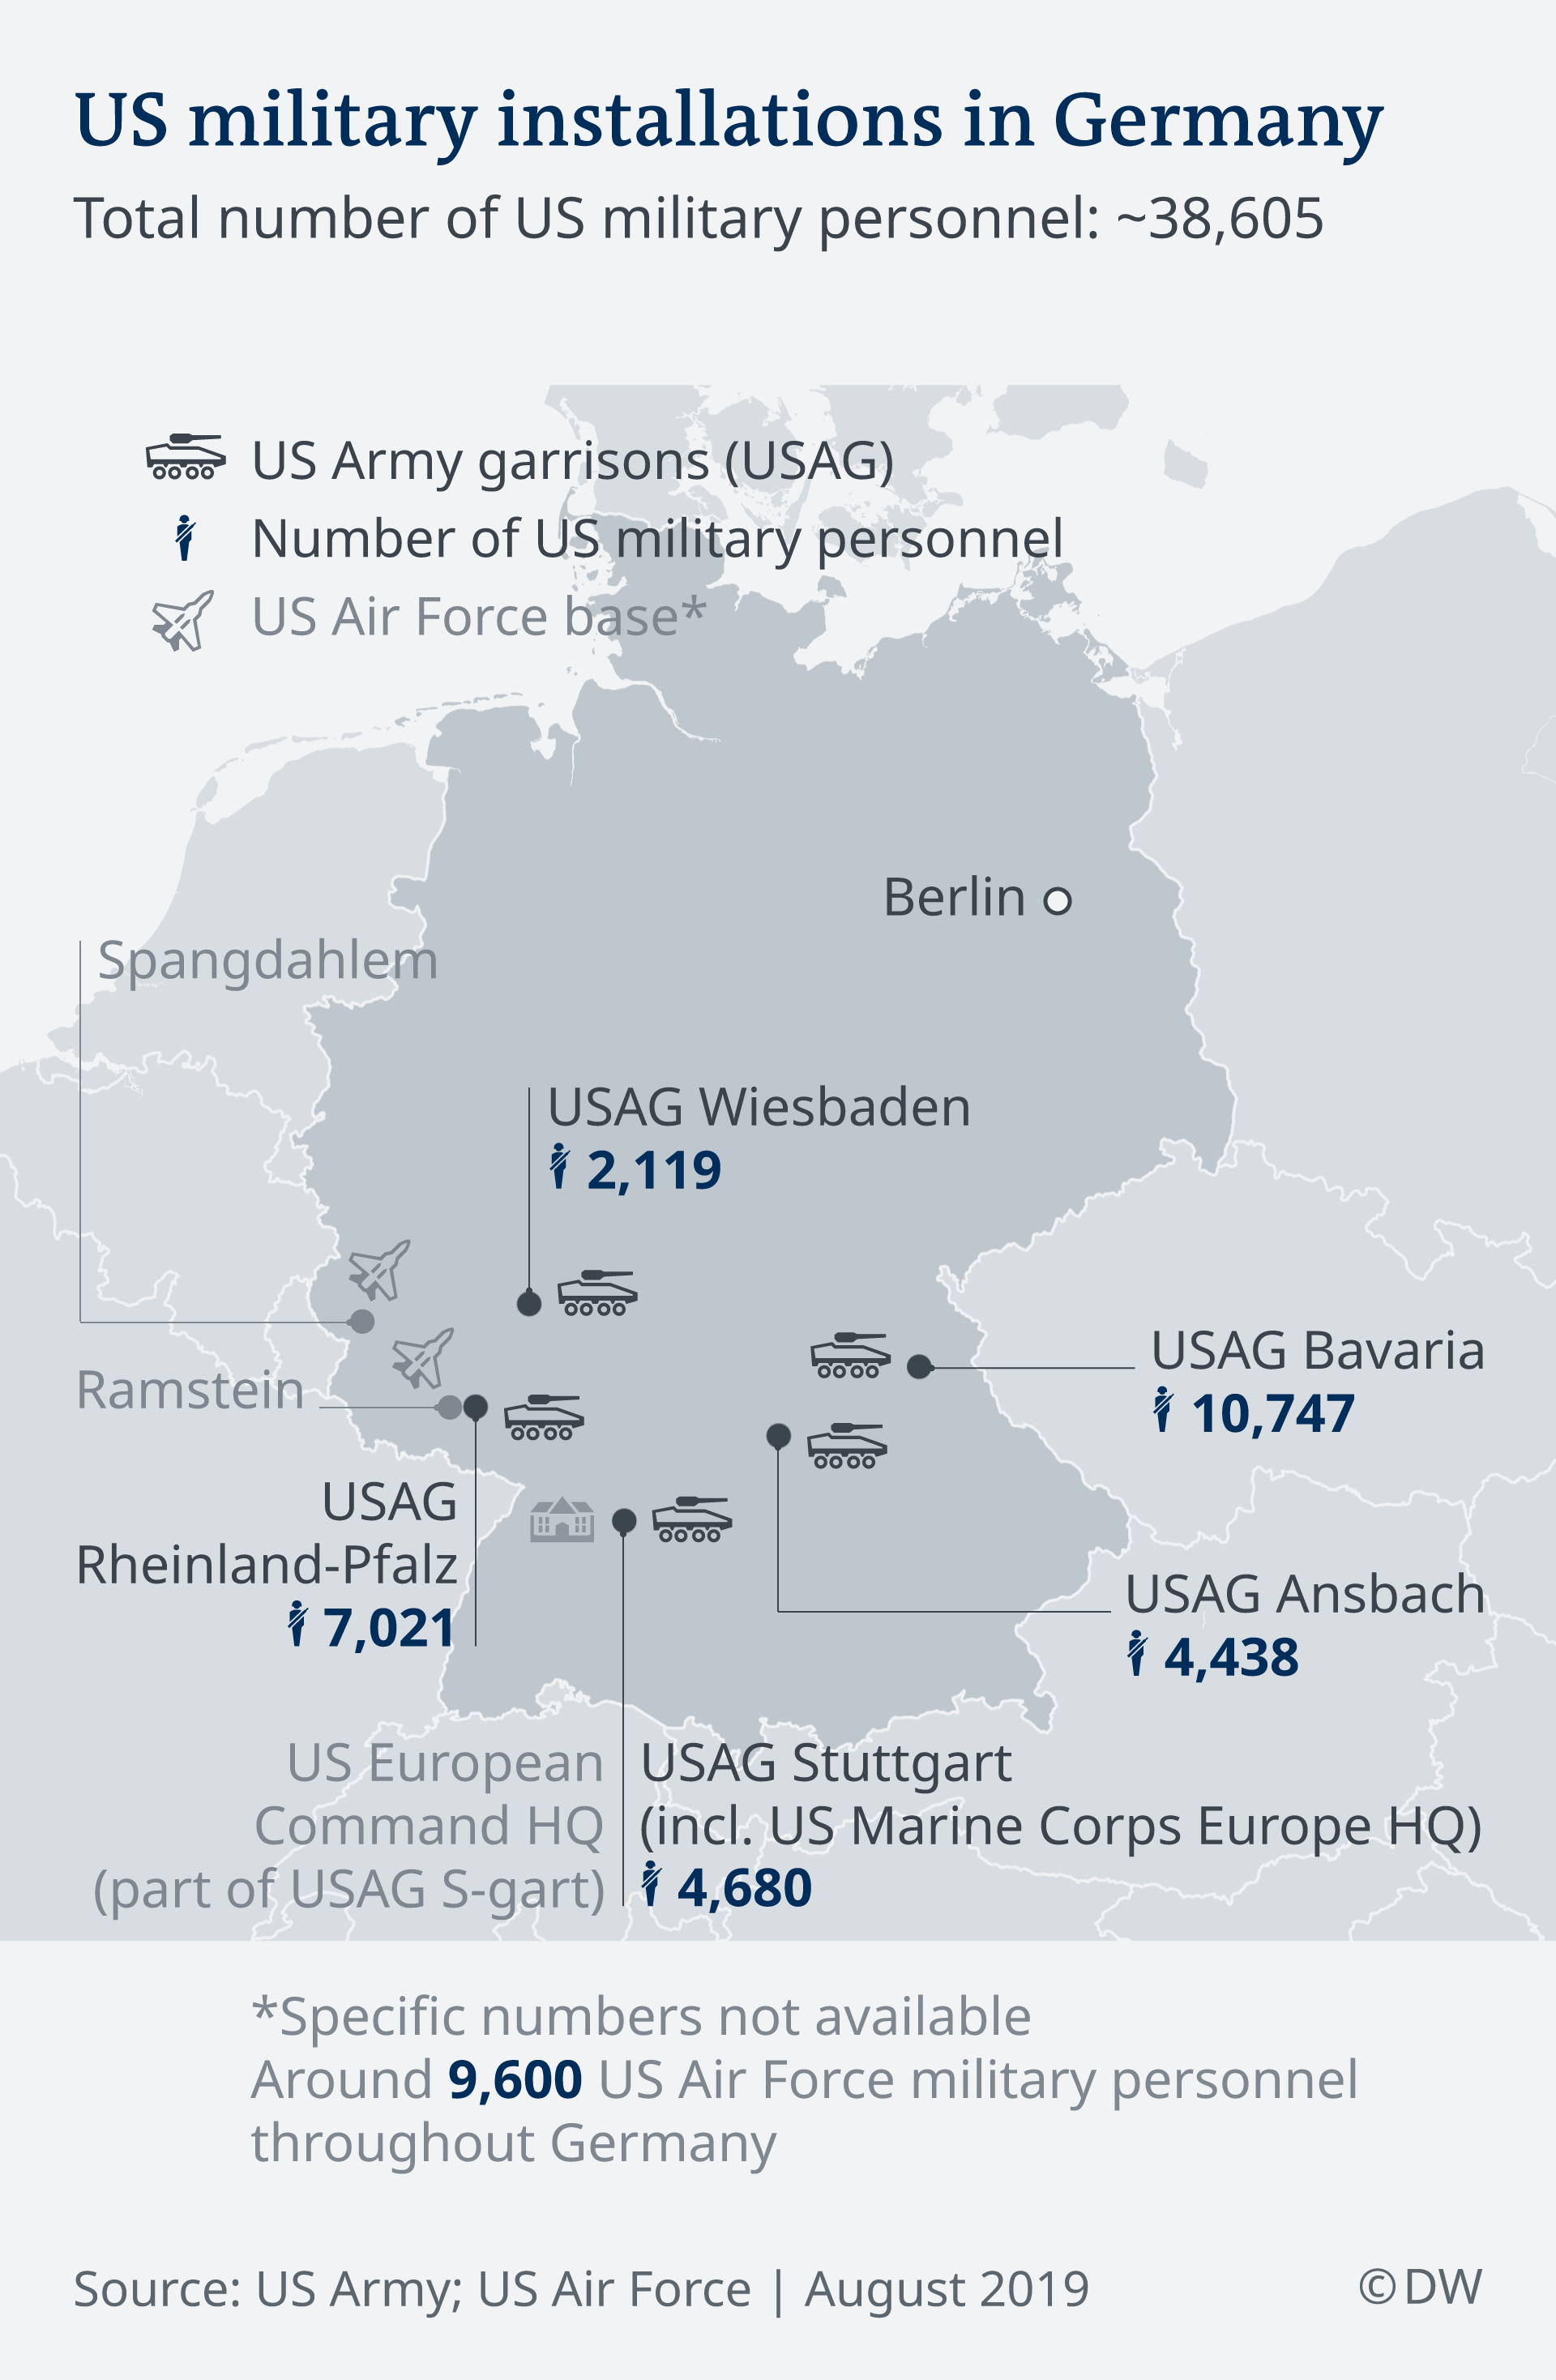 Donald Trump, the US Army and Germany: What is really going on?
Infographic showing US military bases in Germany